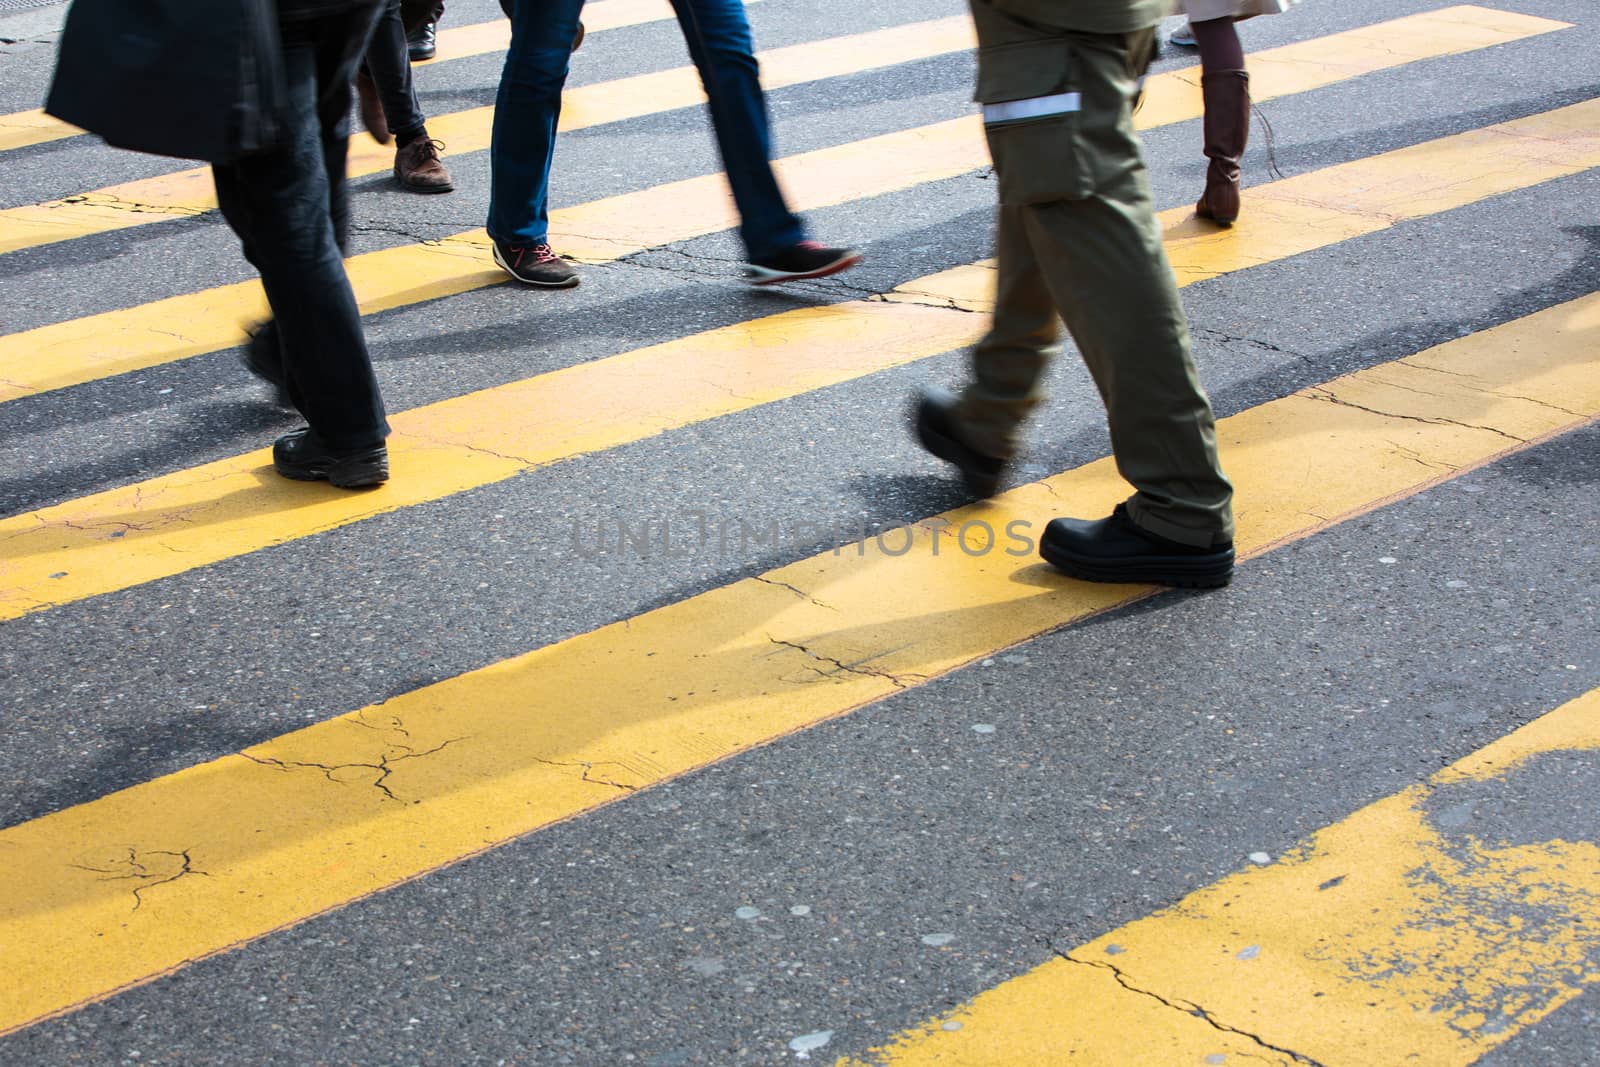 urban traffic concept - city street with a motion blurred crowd crossing a road